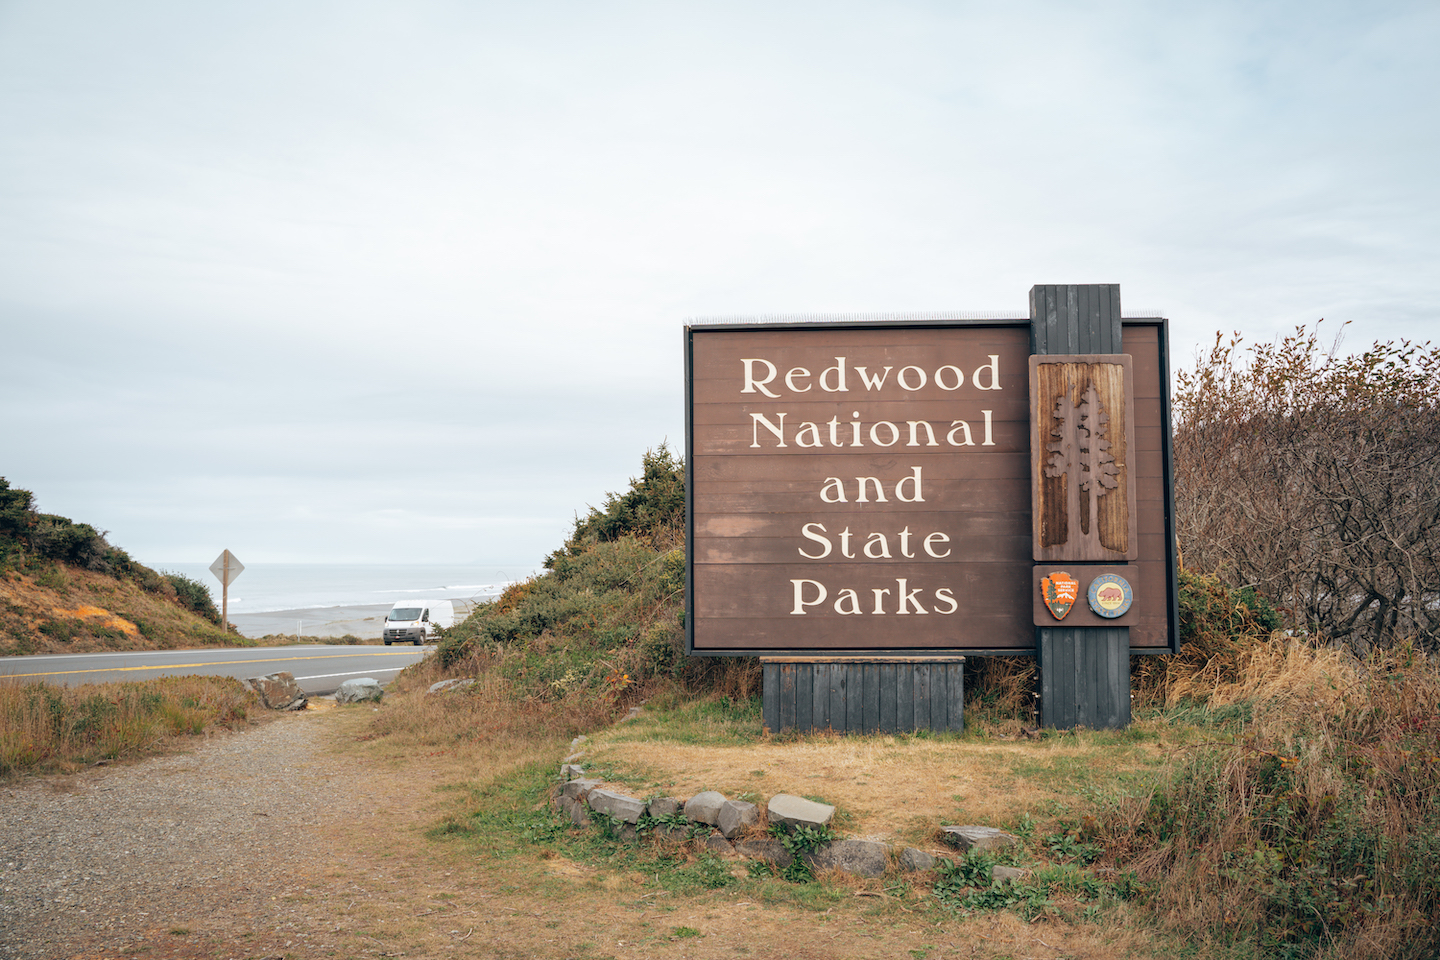 Park entrance sign to Redwood National and State Parks